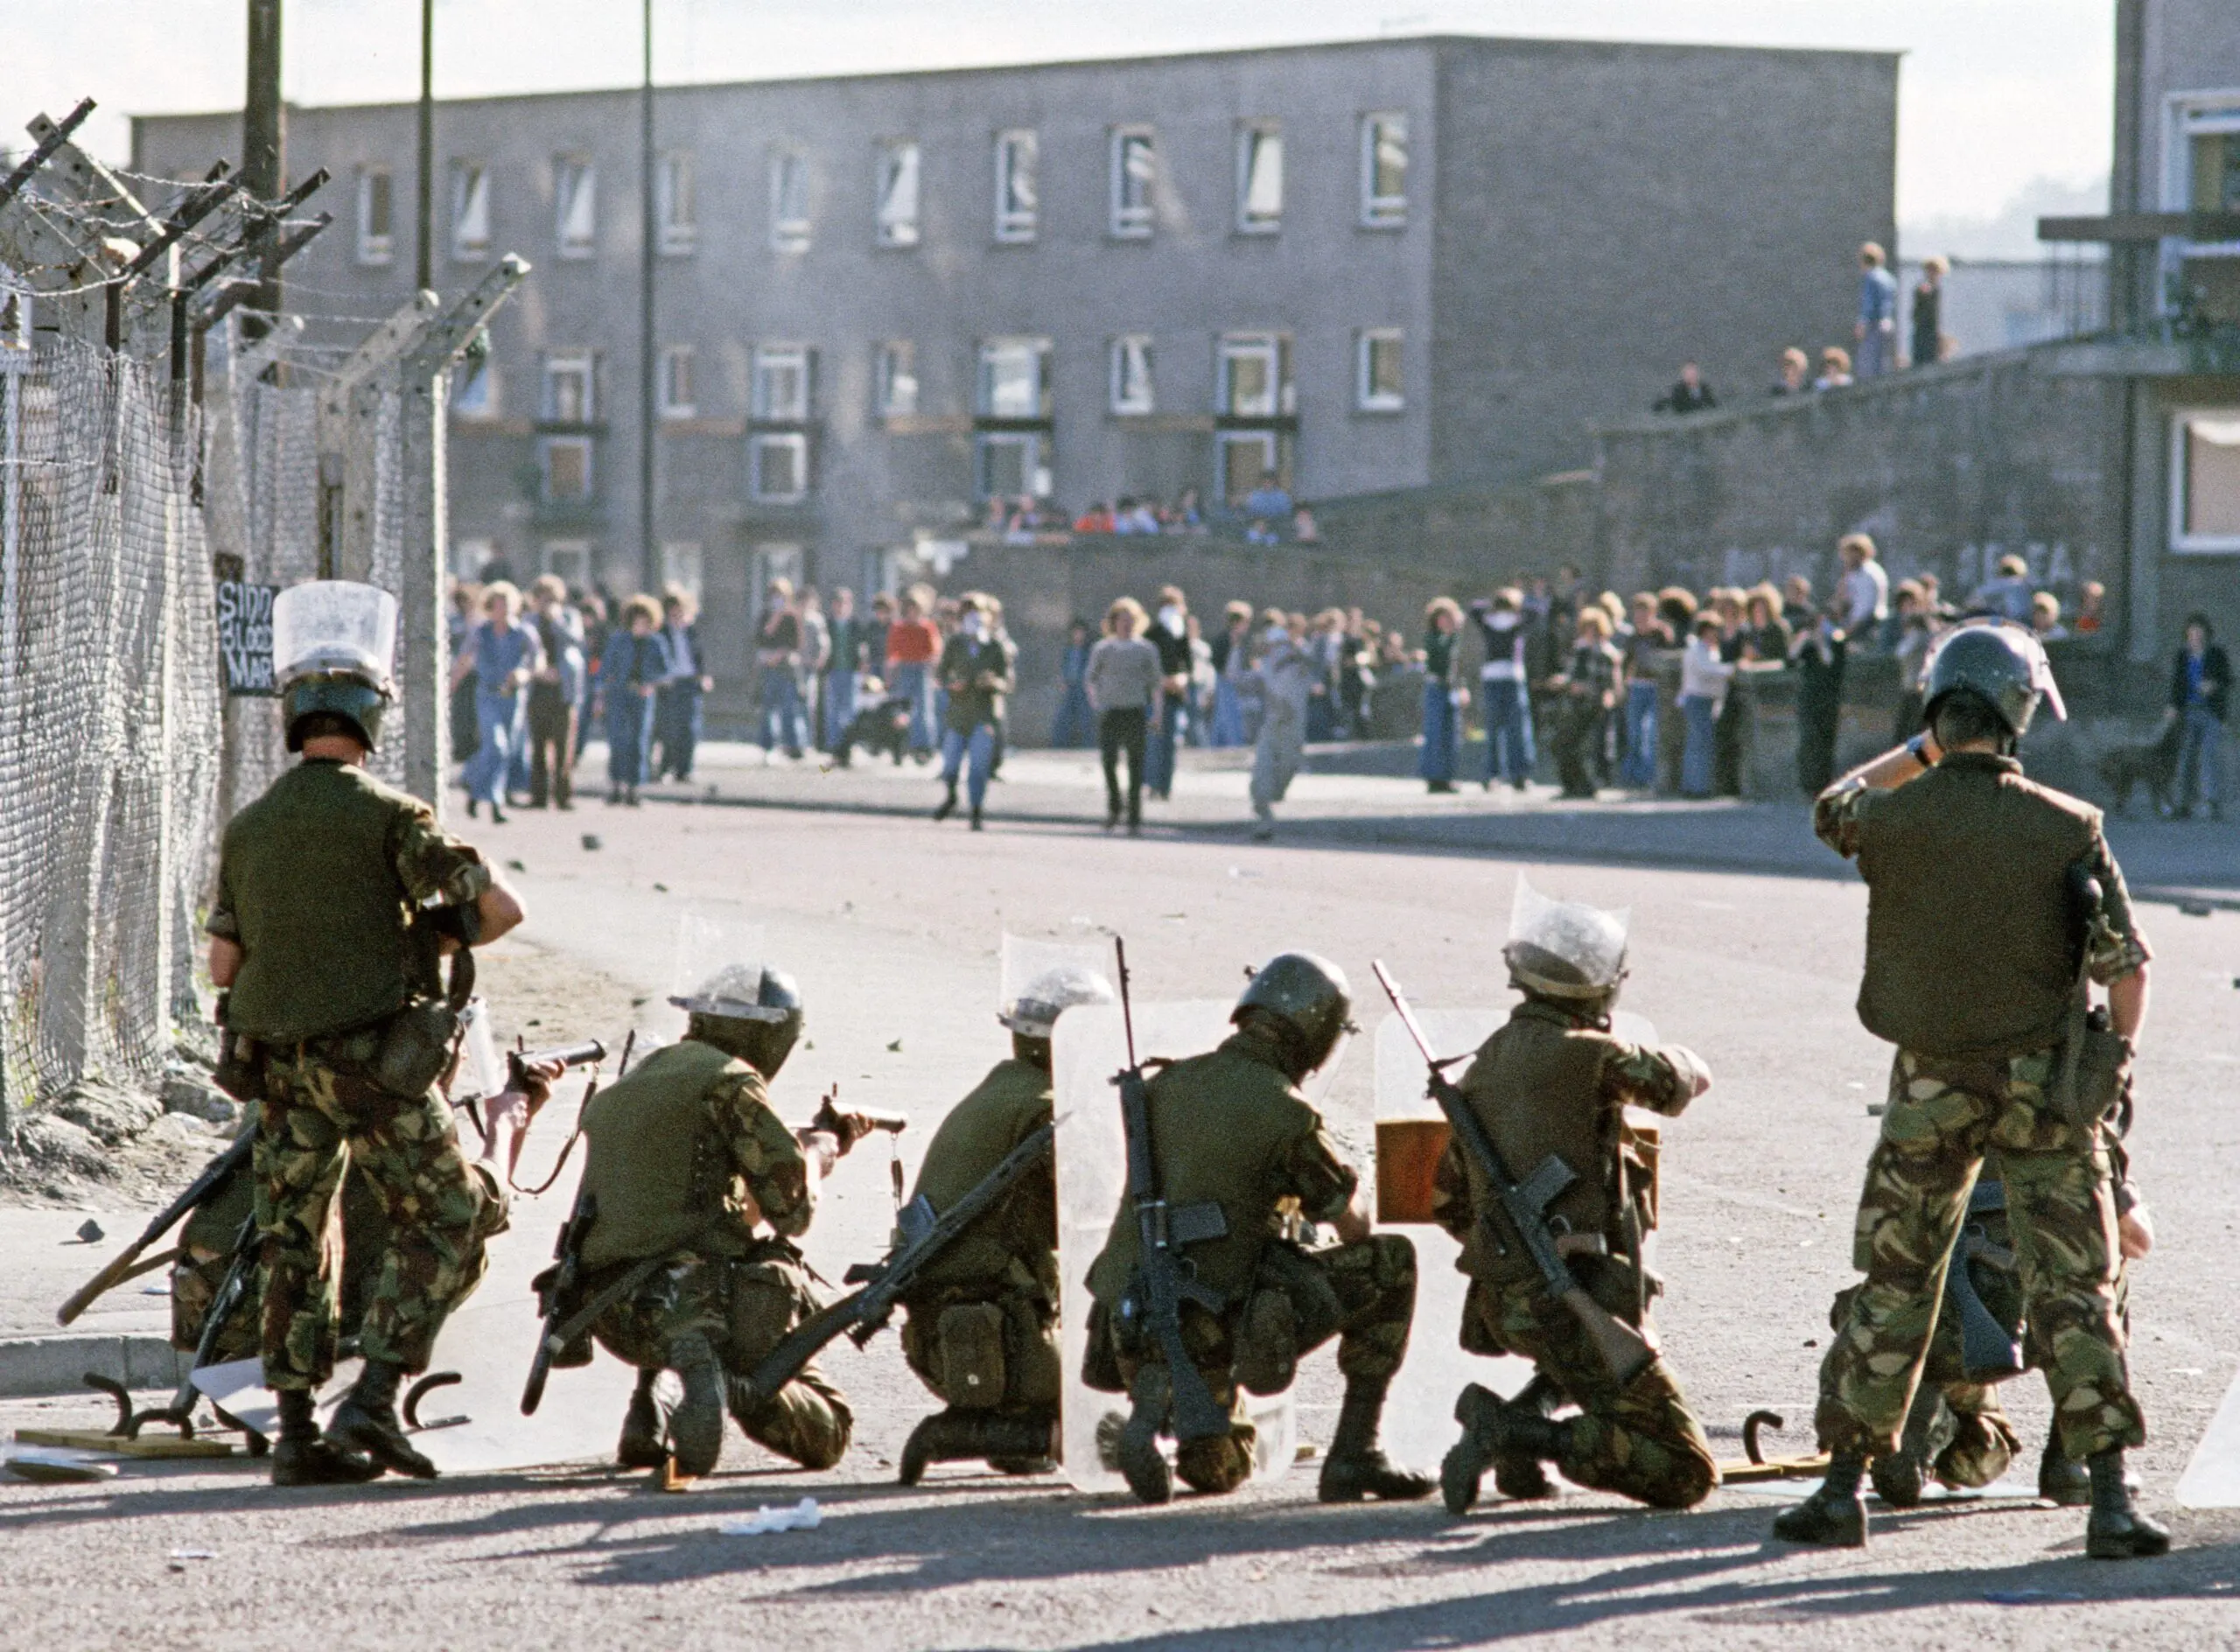 British Army soldiers stand off with a crowd in the streets of Derry in the 1970s.